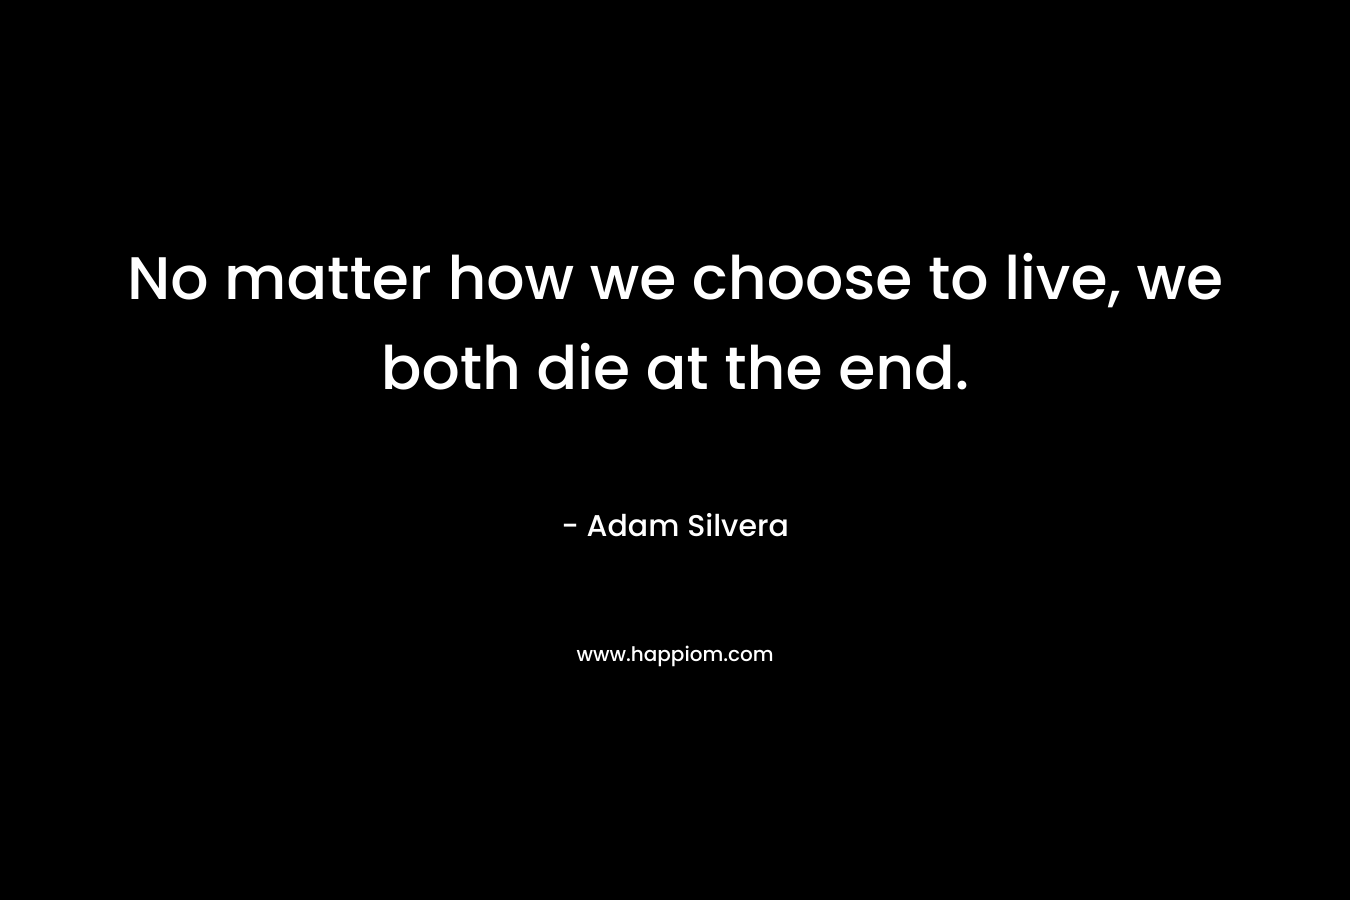 No matter how we choose to live, we both die at the end.